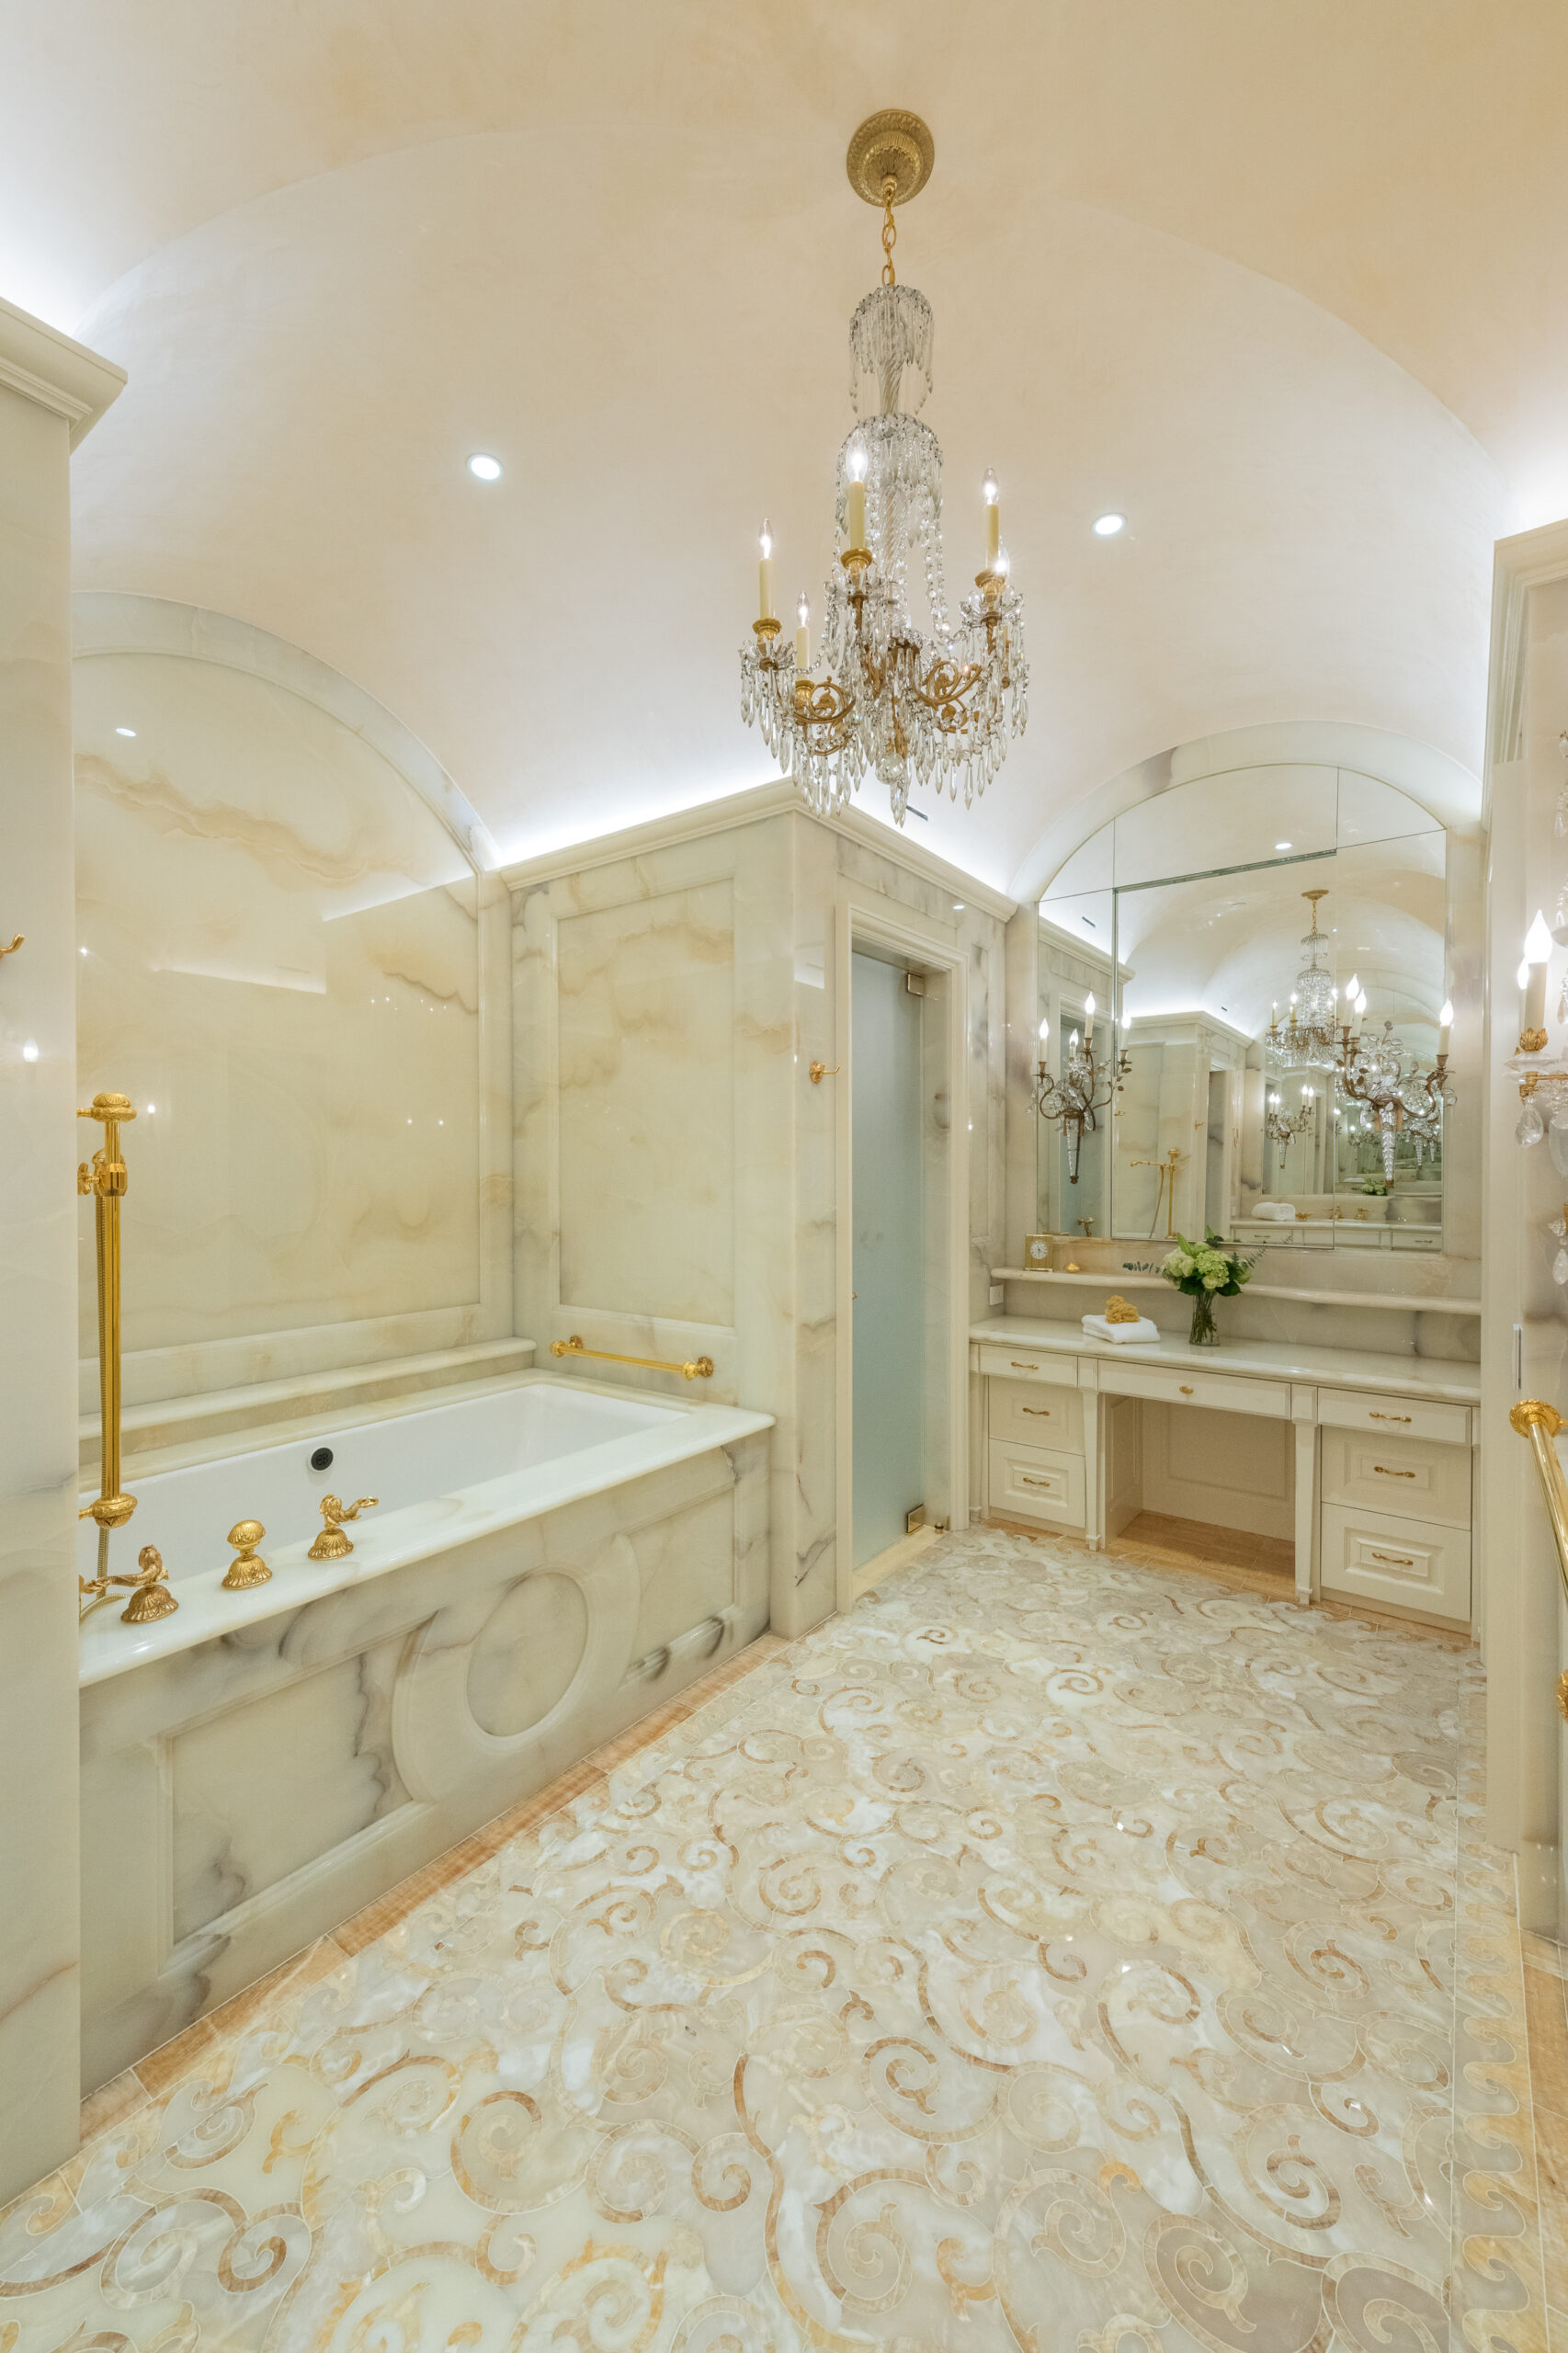 Elegant marble bathroom with glass accents.